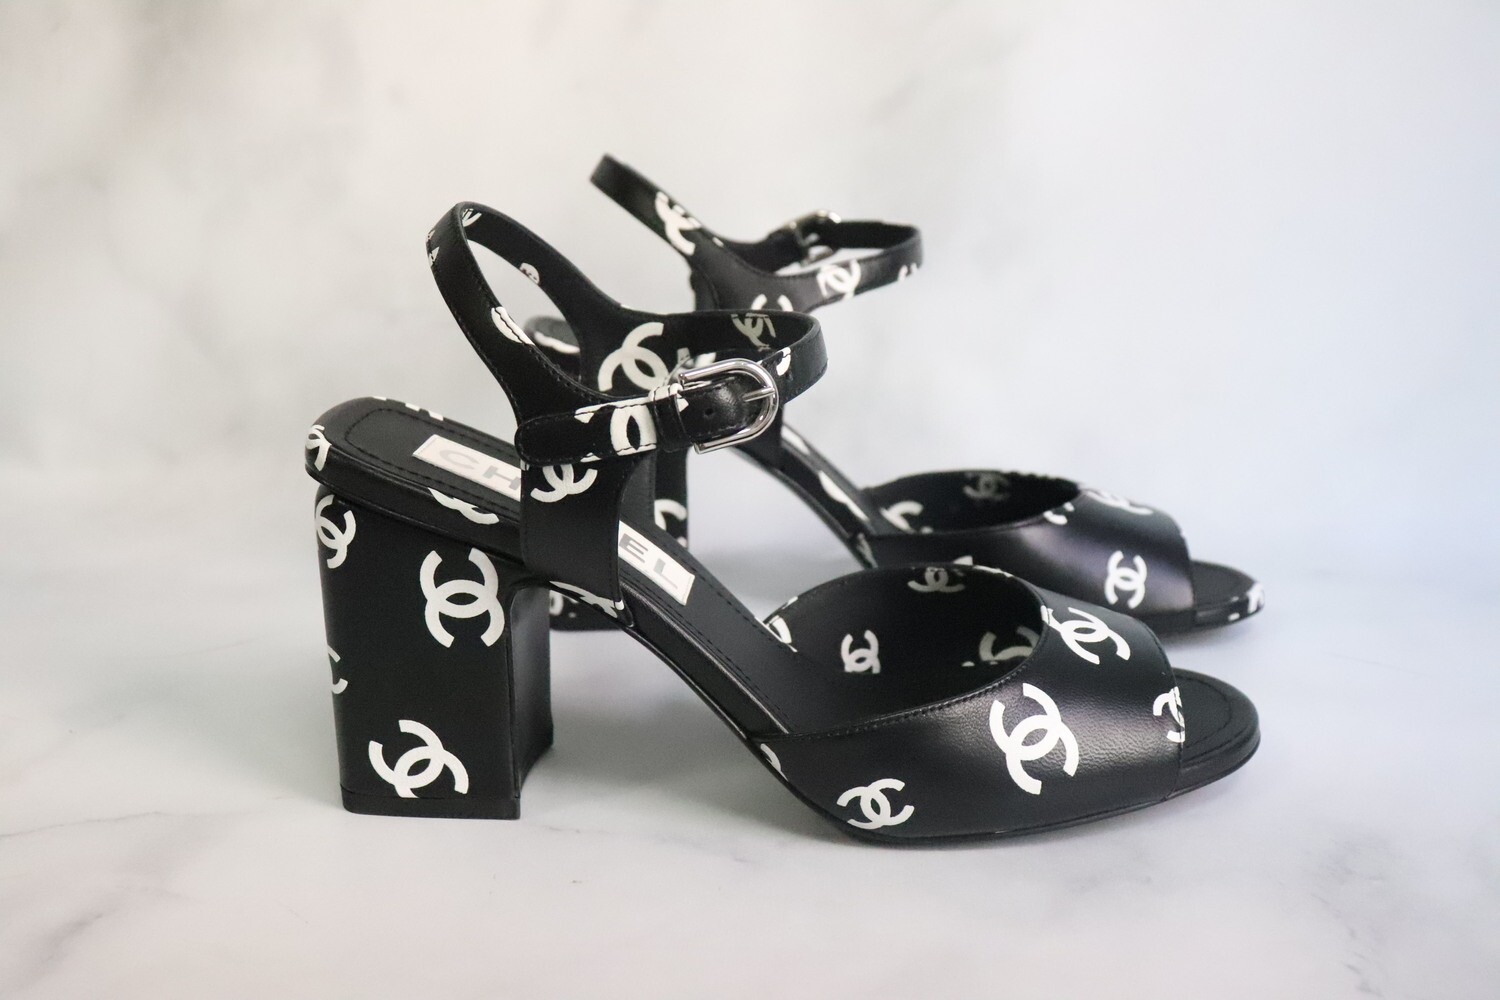 Chanel Shoes, Black with White CCs, Heels, Size 37, New in Box WA001 -  Julia Rose Boston